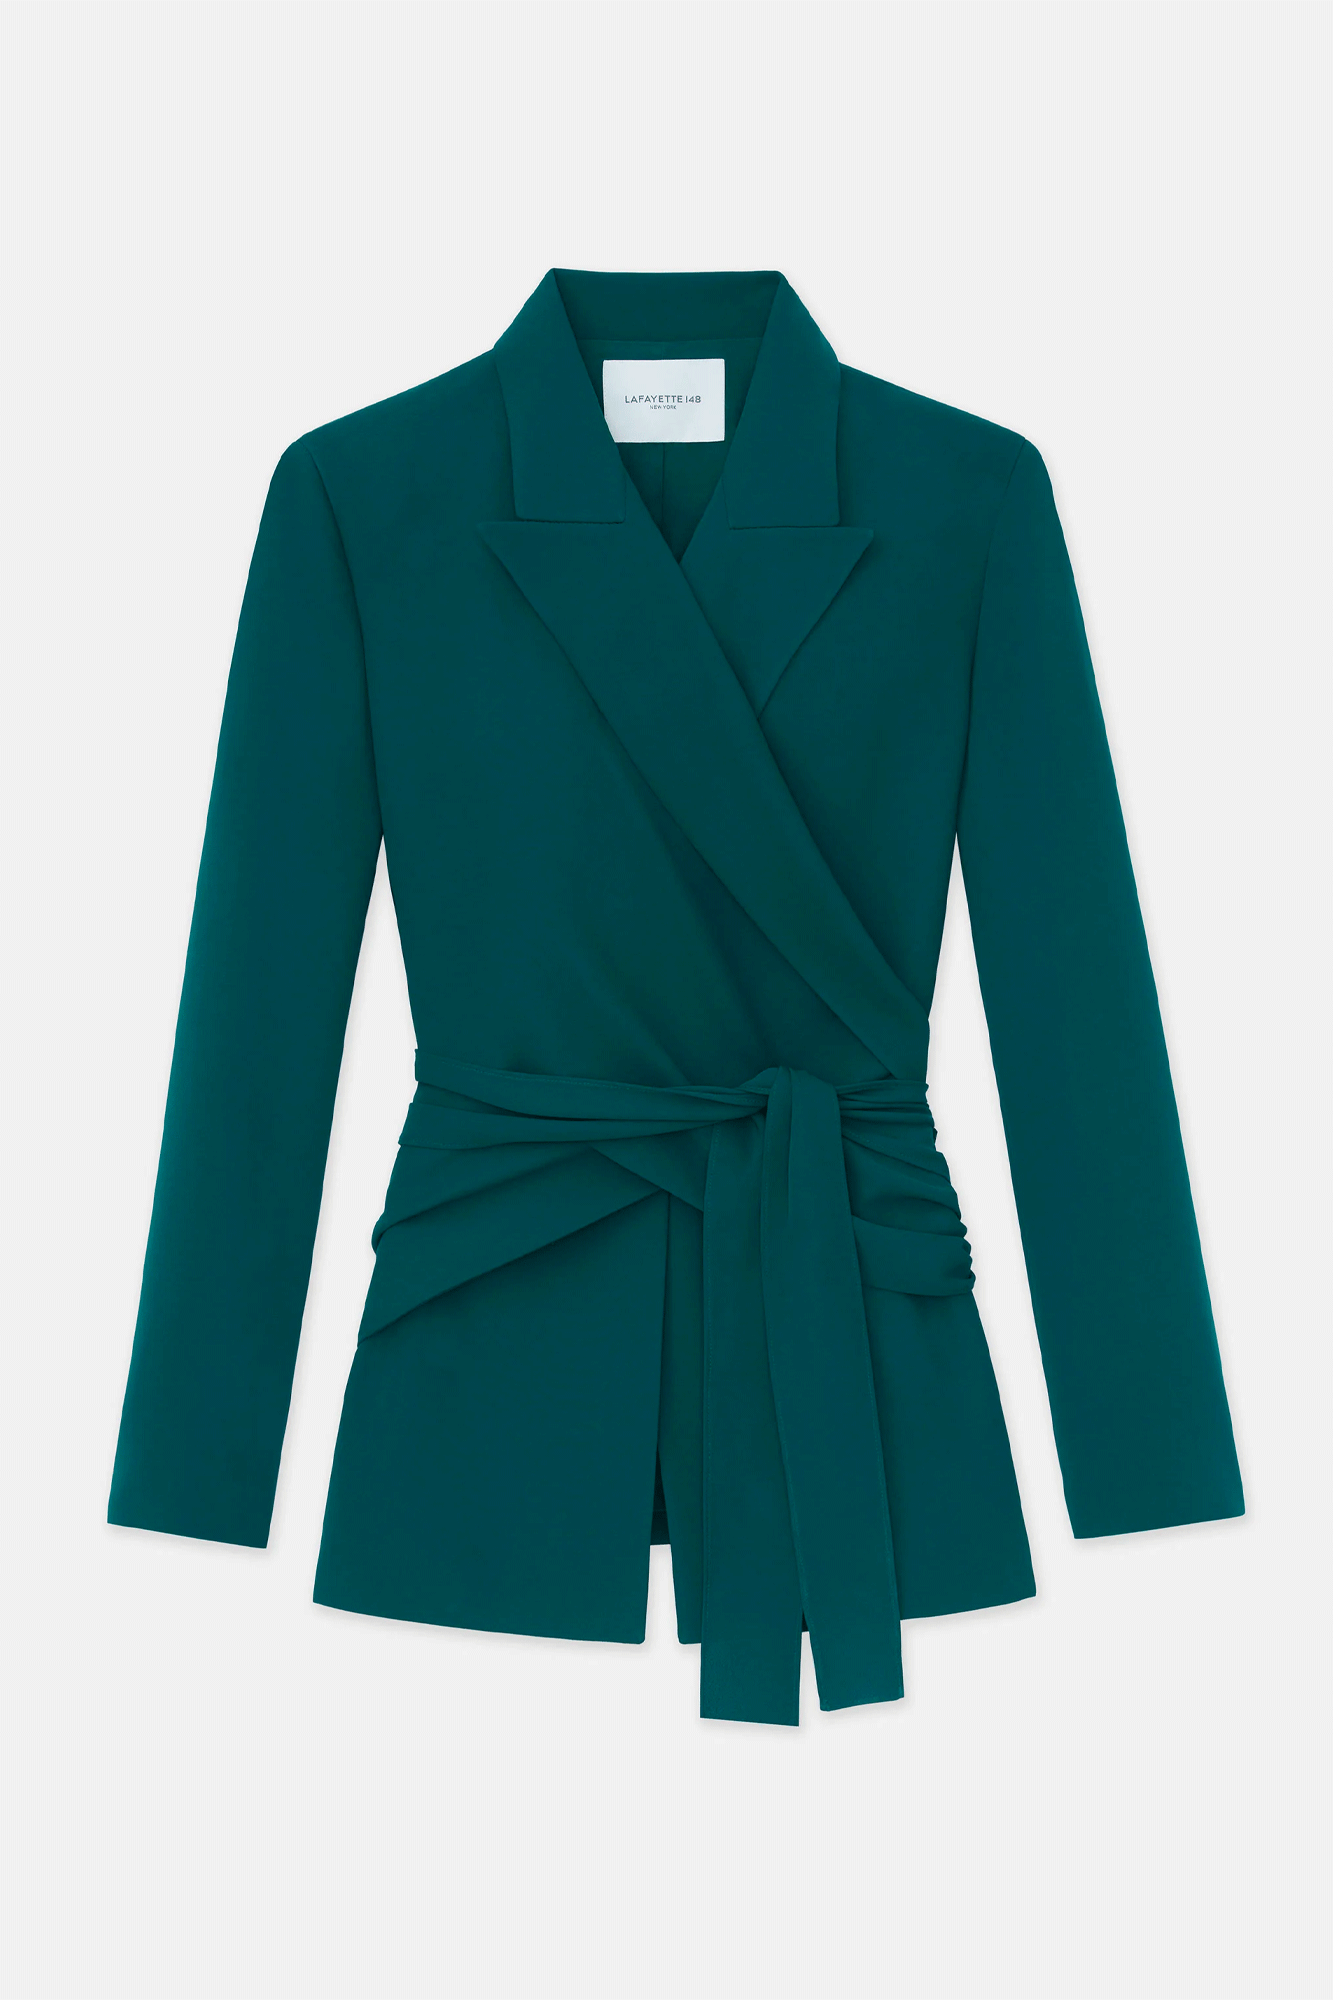 This Wrap Blazer from Lafayette 148 is crafted from responsible Finesse Crepe for a modern, feminine silhouette. Expertly tailored with sculpted darts and peak lapels for a streamlined fit. Crafted with sustainability in mind and perfect for styling for any occasion.